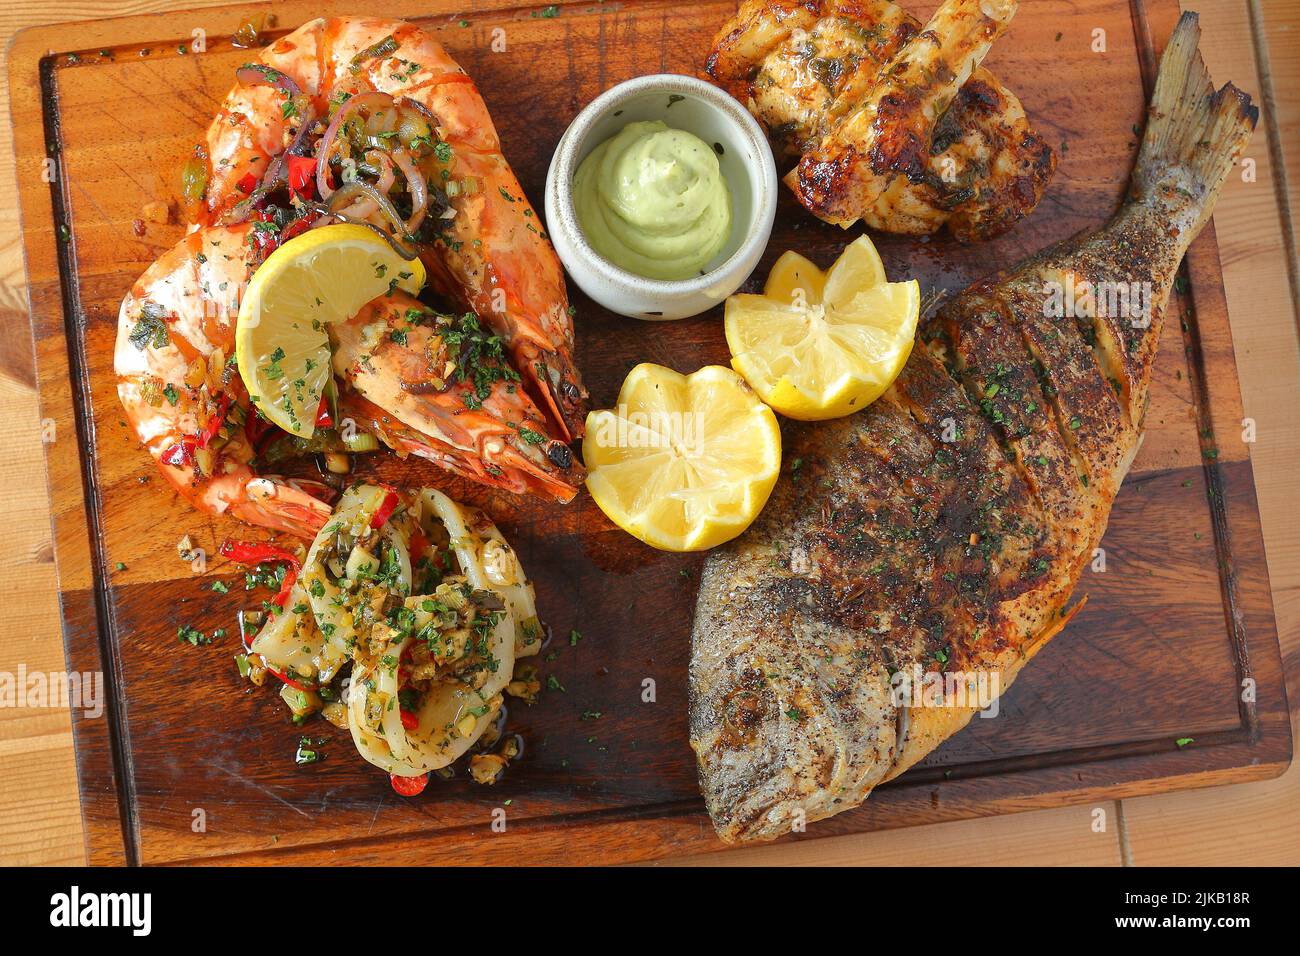 Mixed seafood platter with tiger prawns, calamari and whole grilled fish garnished with lemon and sauce Stock Photo